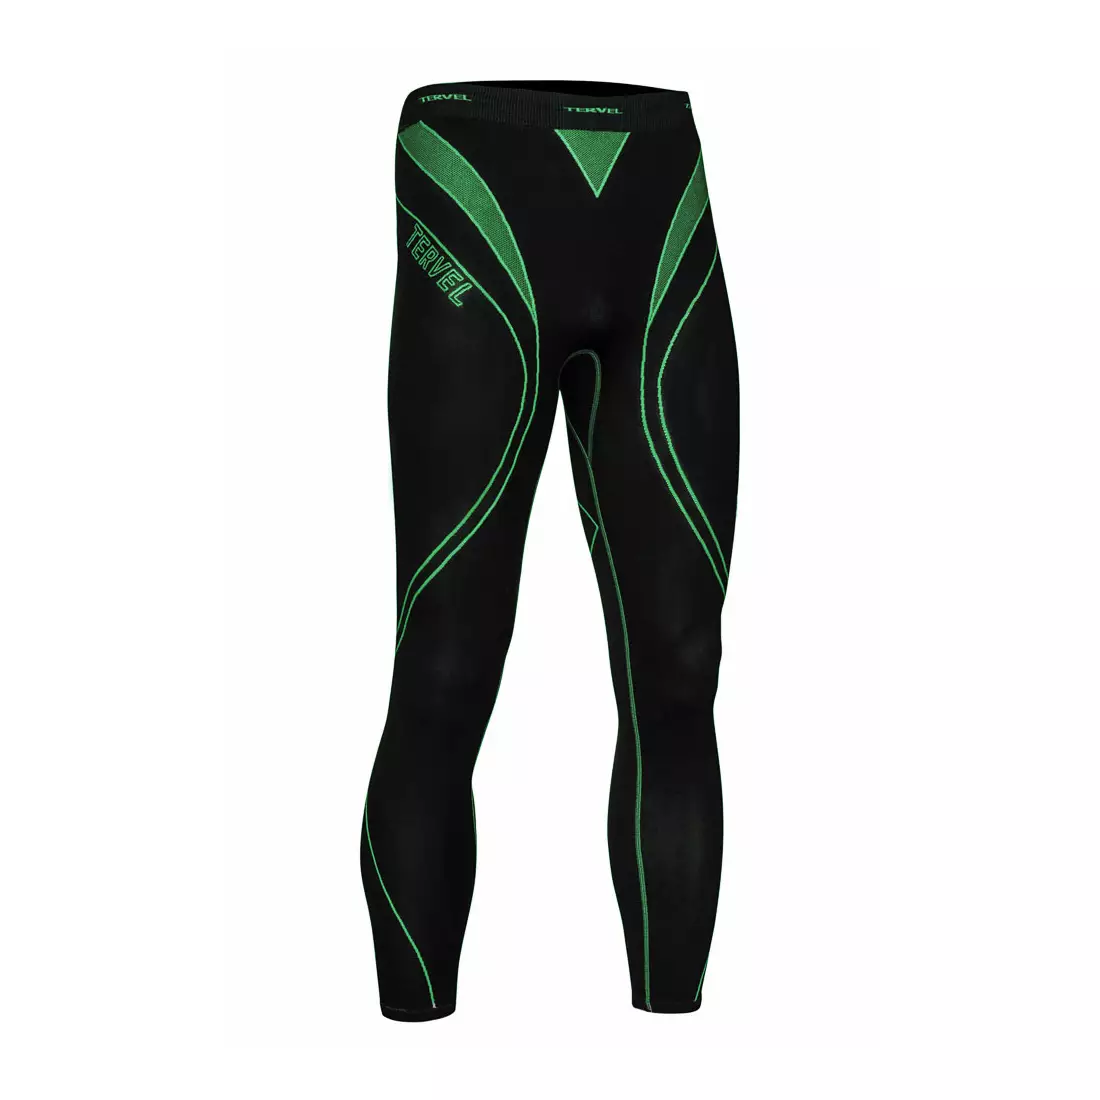 TERVEL OPTILINE men's thermoactive trousers / leggings OPT3004, black and green